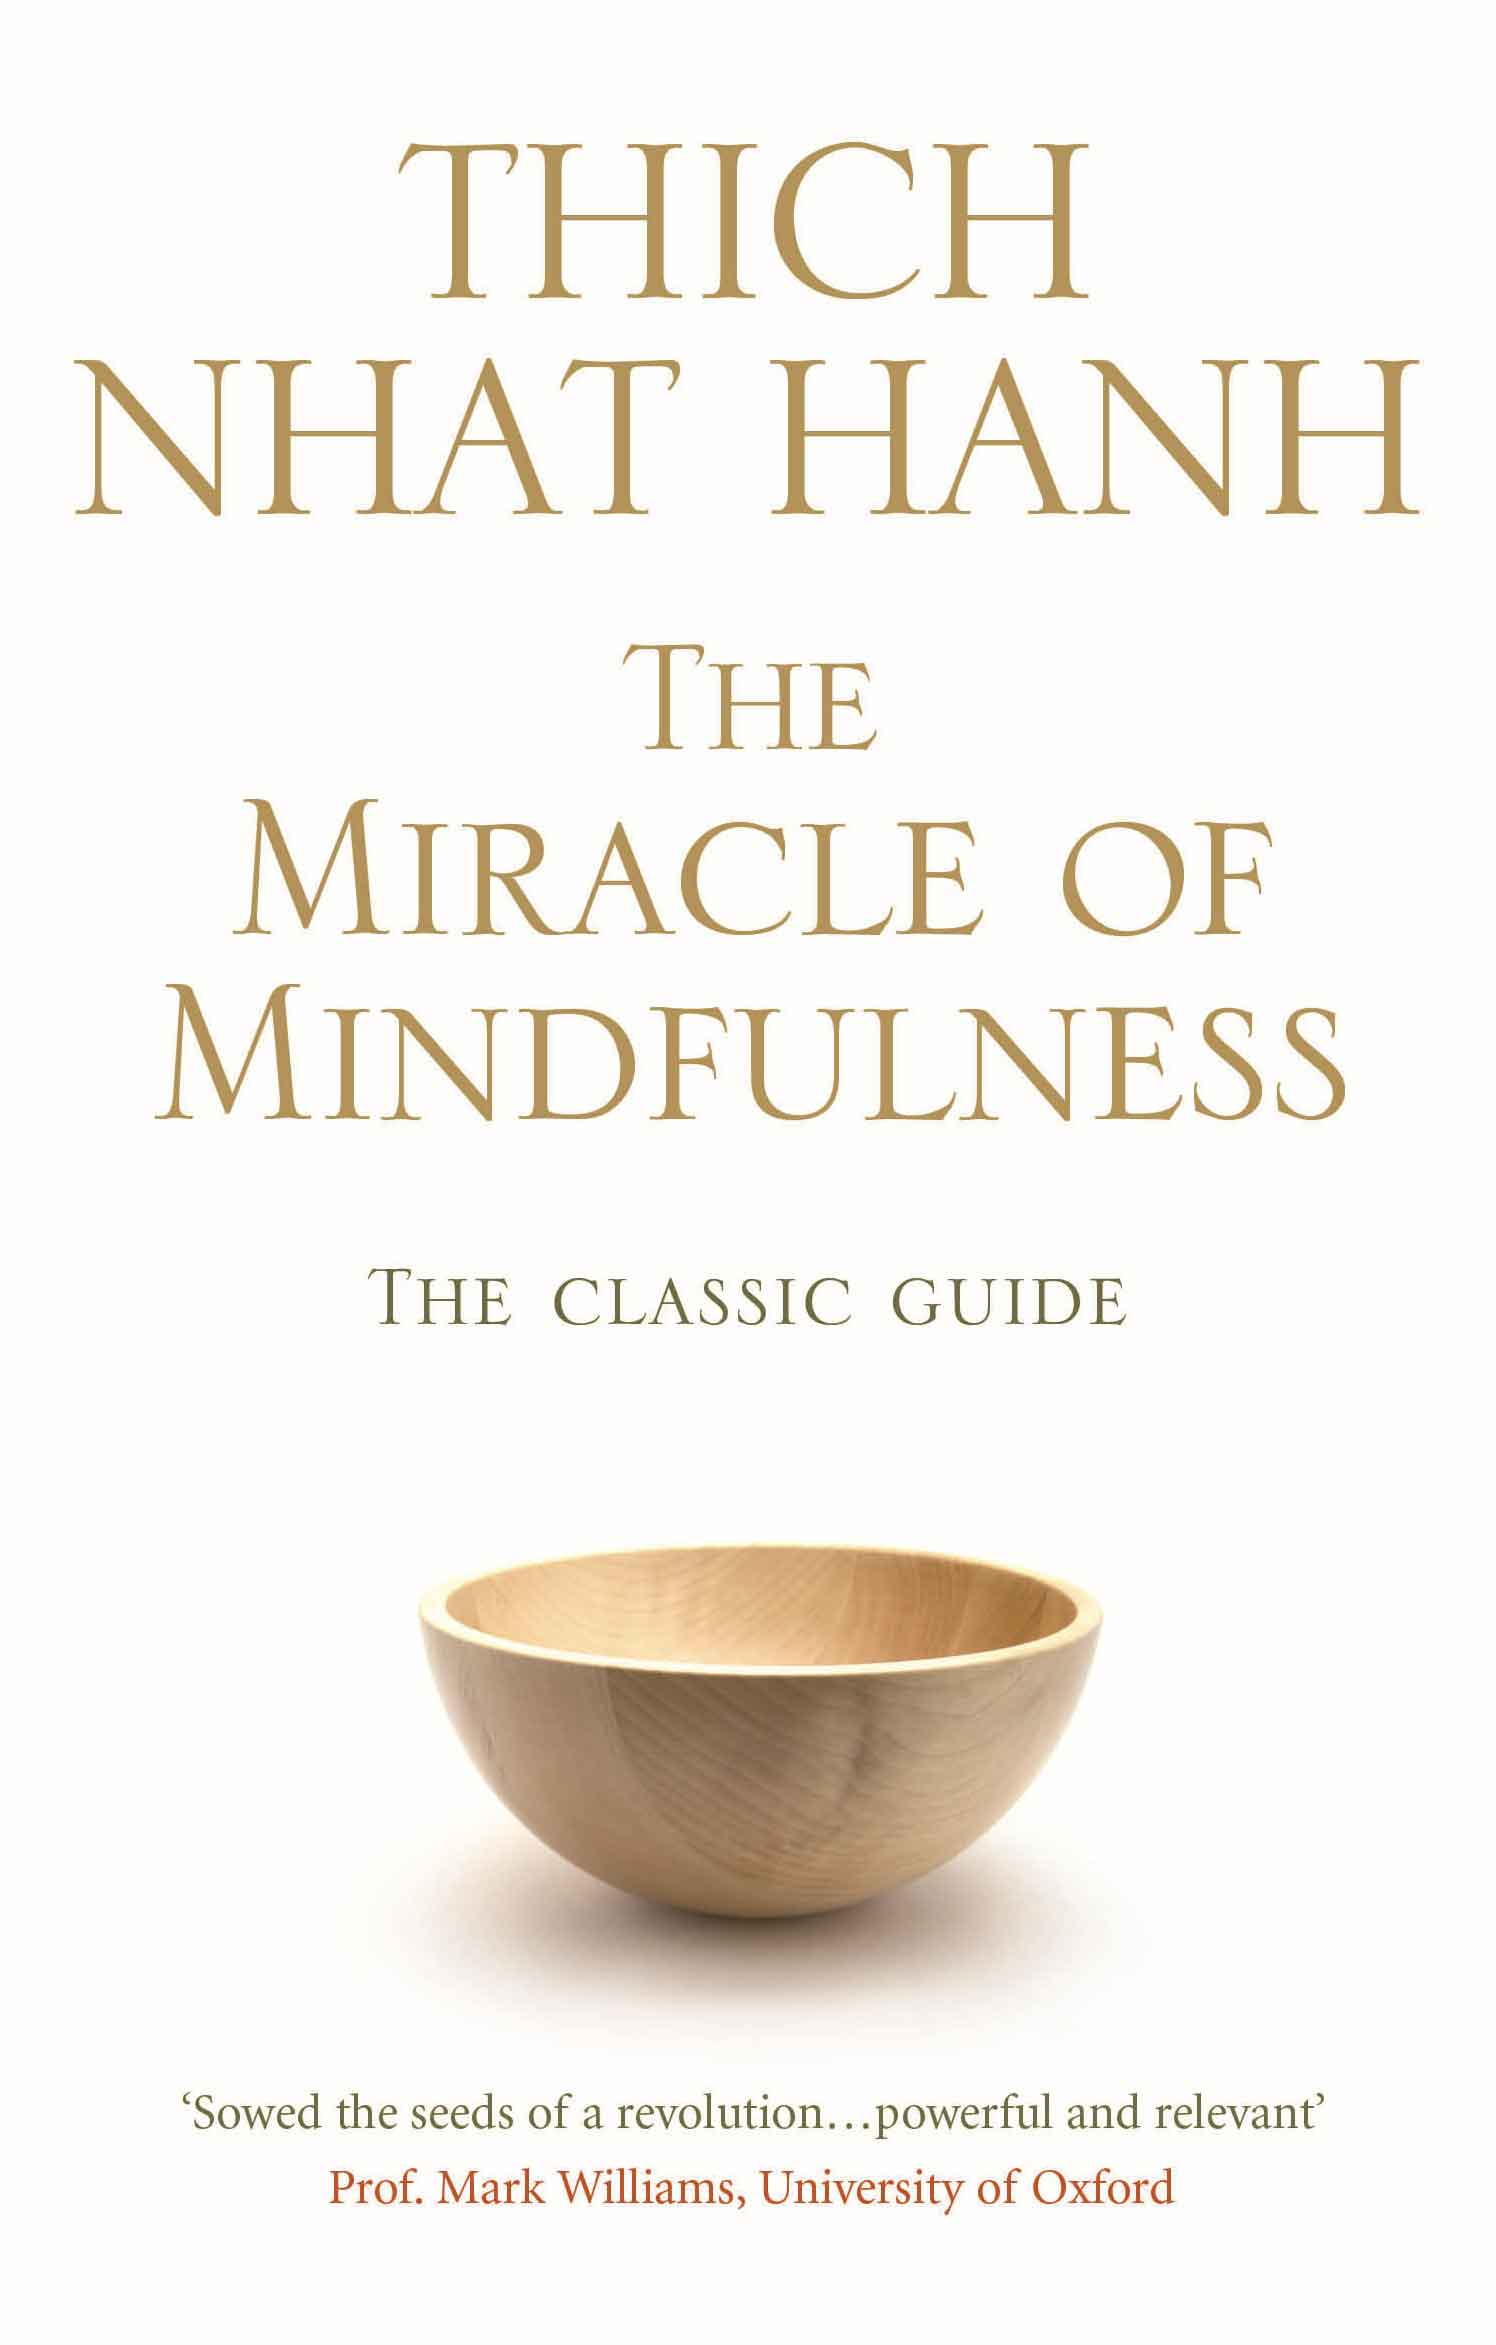 the miracle of mindfulness - thich nhat hanh